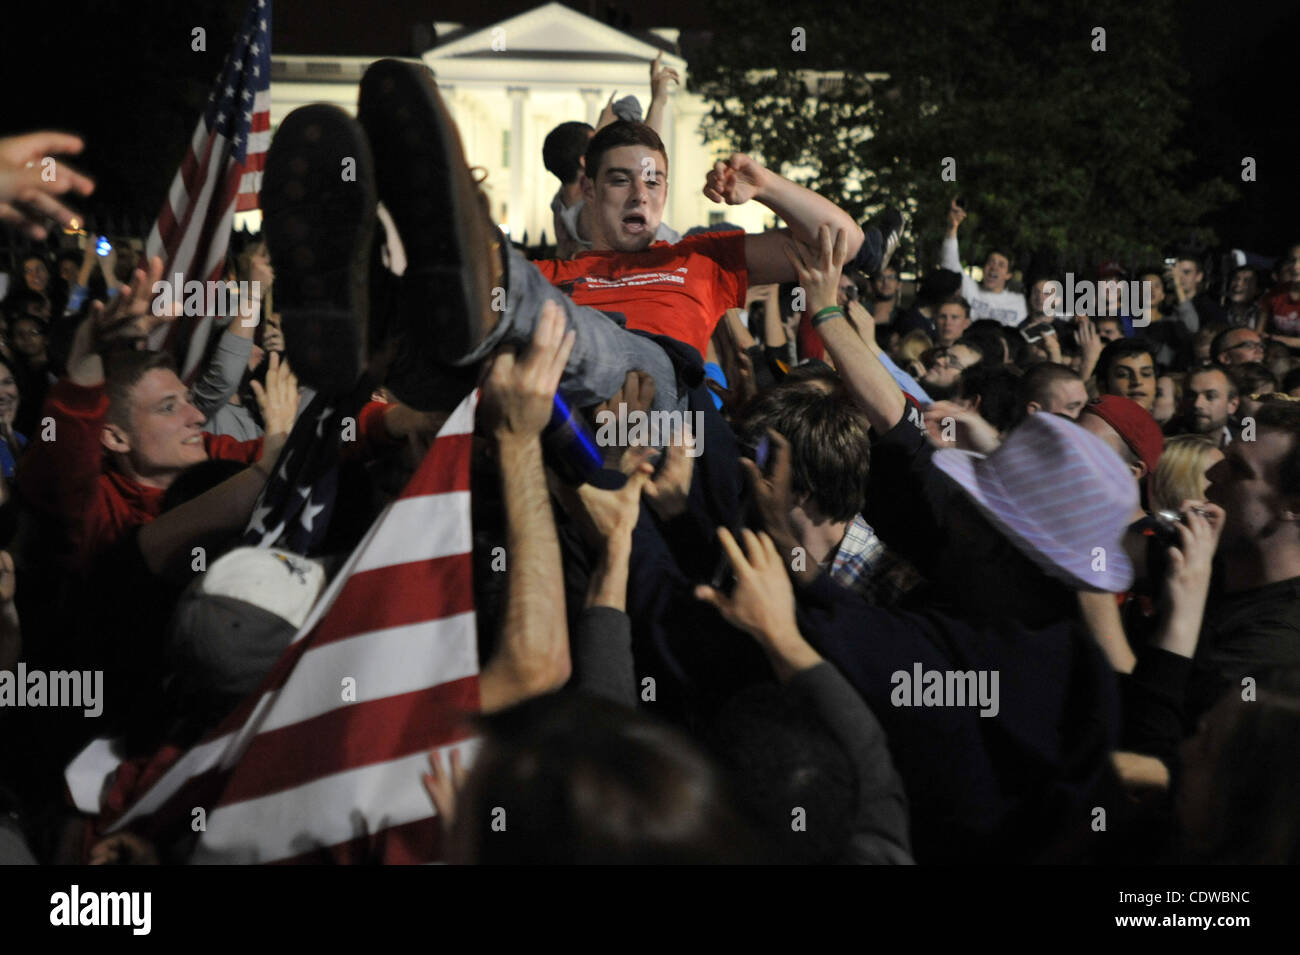 May 2, 2011 - Washington, District of Columbia, U.S. - Crowd surfing breaks out as thousands gathered at the White House in celebration after U.S. President Barack Obama announced the death of Al-Qaeda front man Osama bin Laden. (Credit Image: © Vaughn Wallace/ZUMAPRESS.com) Stock Photo